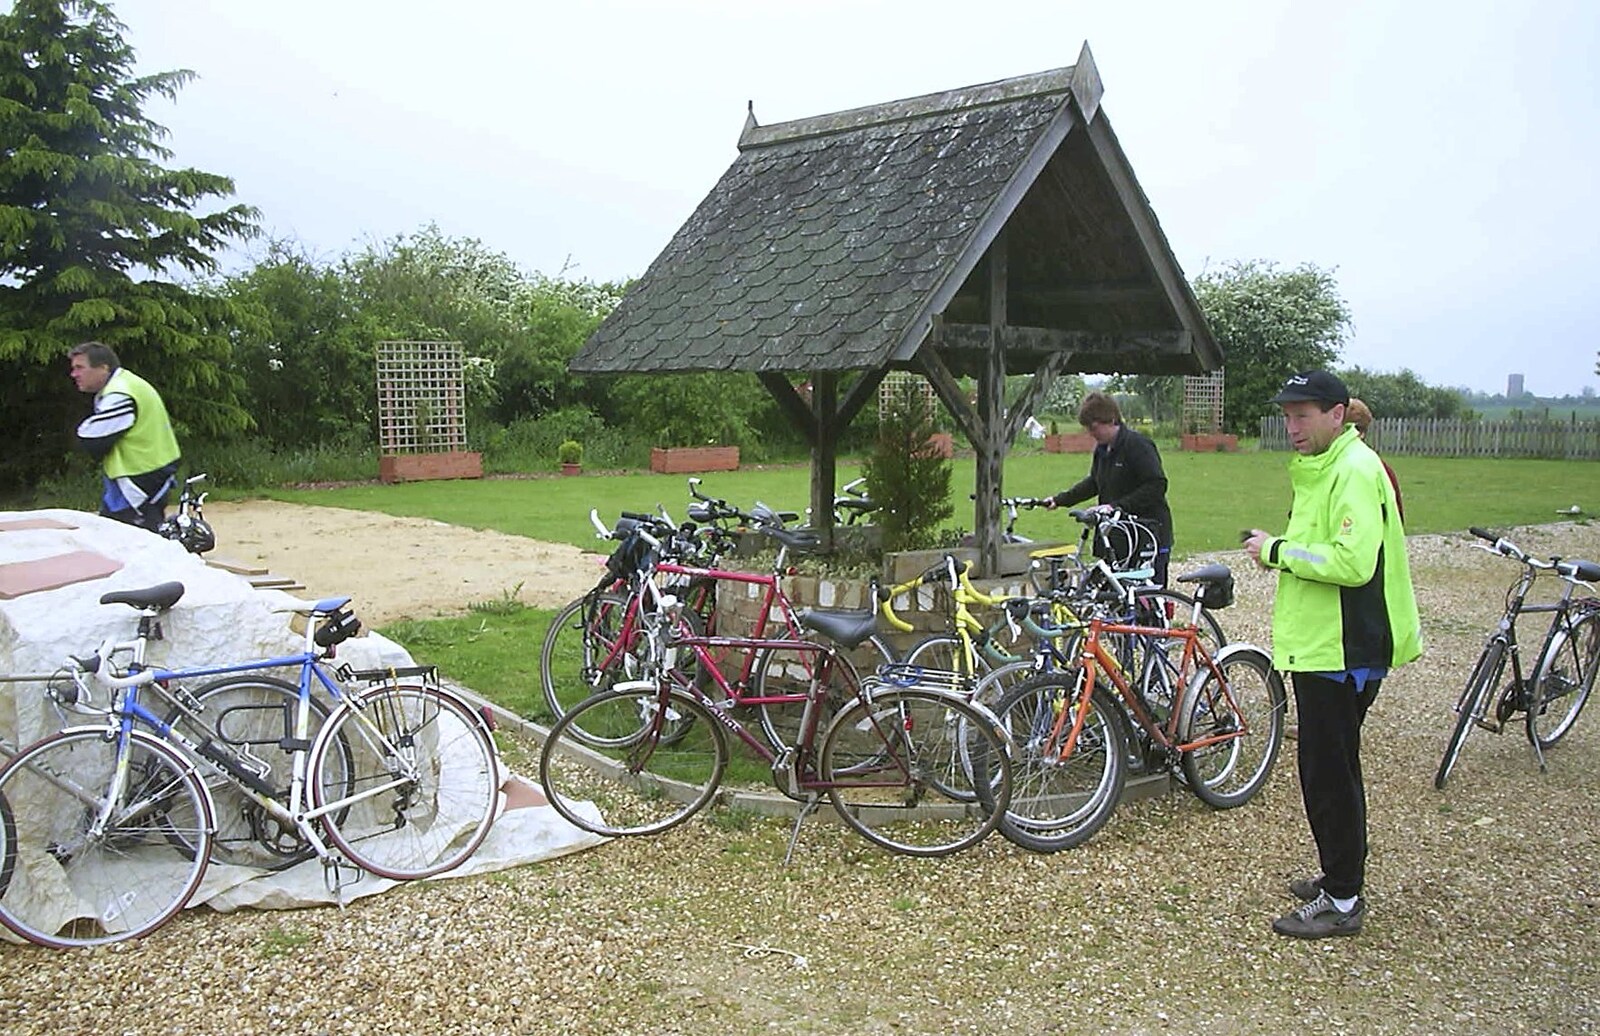 The BSCC Bike Ride, Shefford, Bedford - 11th May 2002: Bikes at the ready